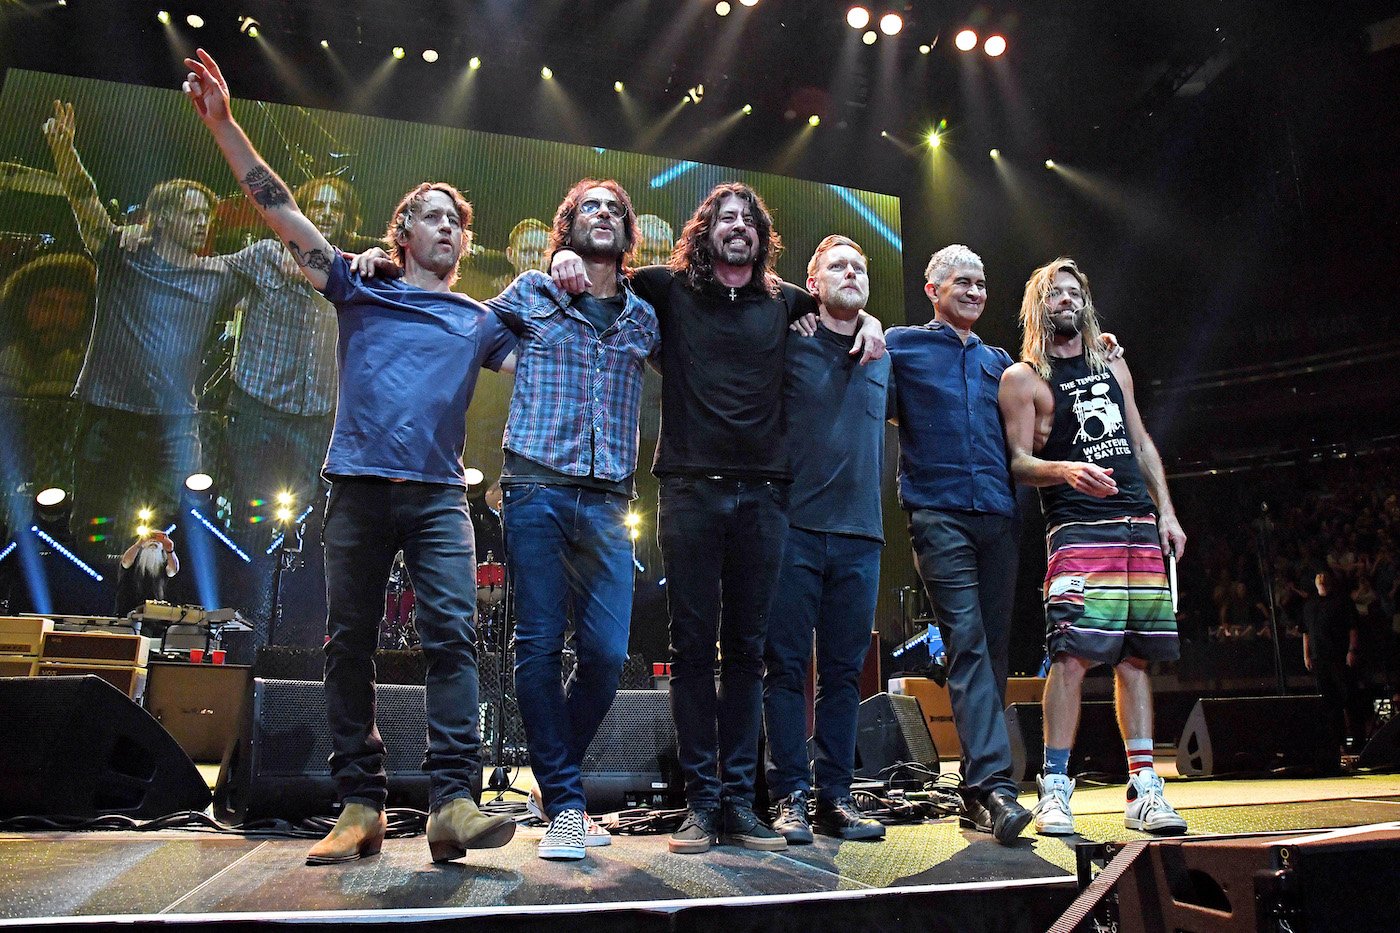 Foo Fighters: (L-R) Chris Shiflett, Rami Jaffee, Dave Grohl, Nate Mendel, Pat Smear, and Taylor Hawkins onstage at Madison Square Garden in June 2021